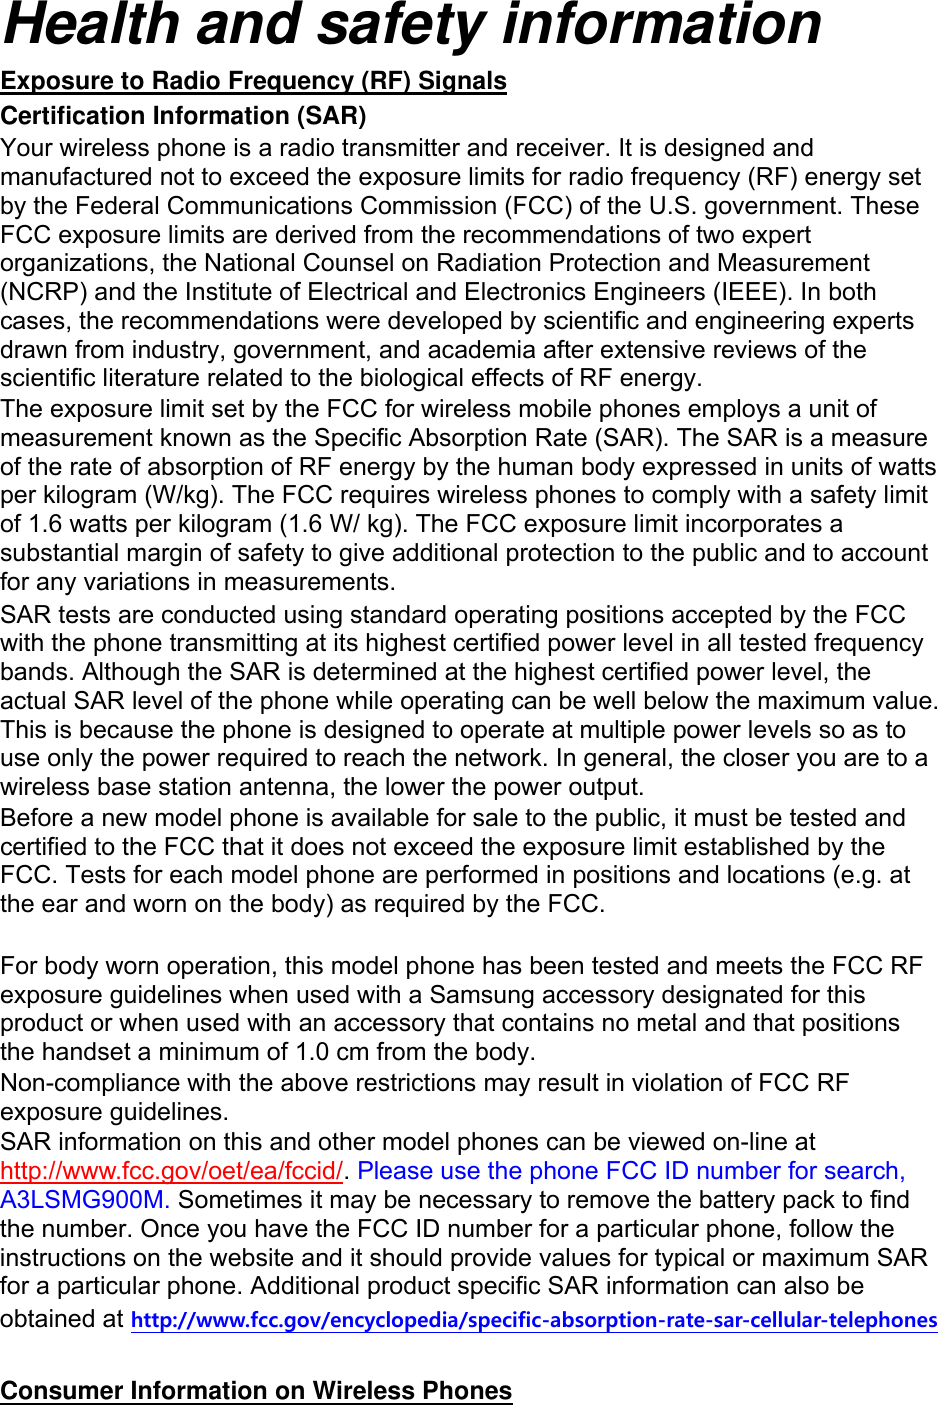 Health and safety information Exposure to Radio Frequency (RF) Signals Certification Information (SAR) Your wireless phone is a radio transmitter and receiver. It is designed and manufactured not to exceed the exposure limits for radio frequency (RF) energy set by the Federal Communications Commission (FCC) of the U.S. government. These FCC exposure limits are derived from the recommendations of two expert organizations, the National Counsel on Radiation Protection and Measurement (NCRP) and the Institute of Electrical and Electronics Engineers (IEEE). In both cases, the recommendations were developed by scientific and engineering experts drawn from industry, government, and academia after extensive reviews of the scientific literature related to the biological effects of RF energy. The exposure limit set by the FCC for wireless mobile phones employs a unit of measurement known as the Specific Absorption Rate (SAR). The SAR is a measure of the rate of absorption of RF energy by the human body expressed in units of watts per kilogram (W/kg). The FCC requires wireless phones to comply with a safety limit of 1.6 watts per kilogram (1.6 W/ kg). The FCC exposure limit incorporates a substantial margin of safety to give additional protection to the public and to account for any variations in measurements. SAR tests are conducted using standard operating positions accepted by the FCC with the phone transmitting at its highest certified power level in all tested frequency bands. Although the SAR is determined at the highest certified power level, the actual SAR level of the phone while operating can be well below the maximum value. This is because the phone is designed to operate at multiple power levels so as to use only the power required to reach the network. In general, the closer you are to a wireless base station antenna, the lower the power output. Before a new model phone is available for sale to the public, it must be tested and certified to the FCC that it does not exceed the exposure limit established by the FCC. Tests for each model phone are performed in positions and locations (e.g. at the ear and worn on the body) as required by the FCC.      For body worn operation, this model phone has been tested and meets the FCC RF exposure guidelines when used with a Samsung accessory designated for this product or when used with an accessory that contains no metal and that positions the handset a minimum of 1.0 cm from the body.   Non-compliance with the above restrictions may result in violation of FCC RF exposure guidelines. SAR information on this and other model phones can be viewed on-line at http://www.fcc.gov/oet/ea/fccid/. Please use the phone FCC ID number for search, A3LSMG900M. Sometimes it may be necessary to remove the battery pack to find the number. Once you have the FCC ID number for a particular phone, follow the instructions on the website and it should provide values for typical or maximum SAR for a particular phone. Additional product specific SAR information can also be obtained at http://www.fcc.gov/encyclopedia/specific-absorption-rate-sar-cellular-telephones  Consumer Information on Wireless Phones 